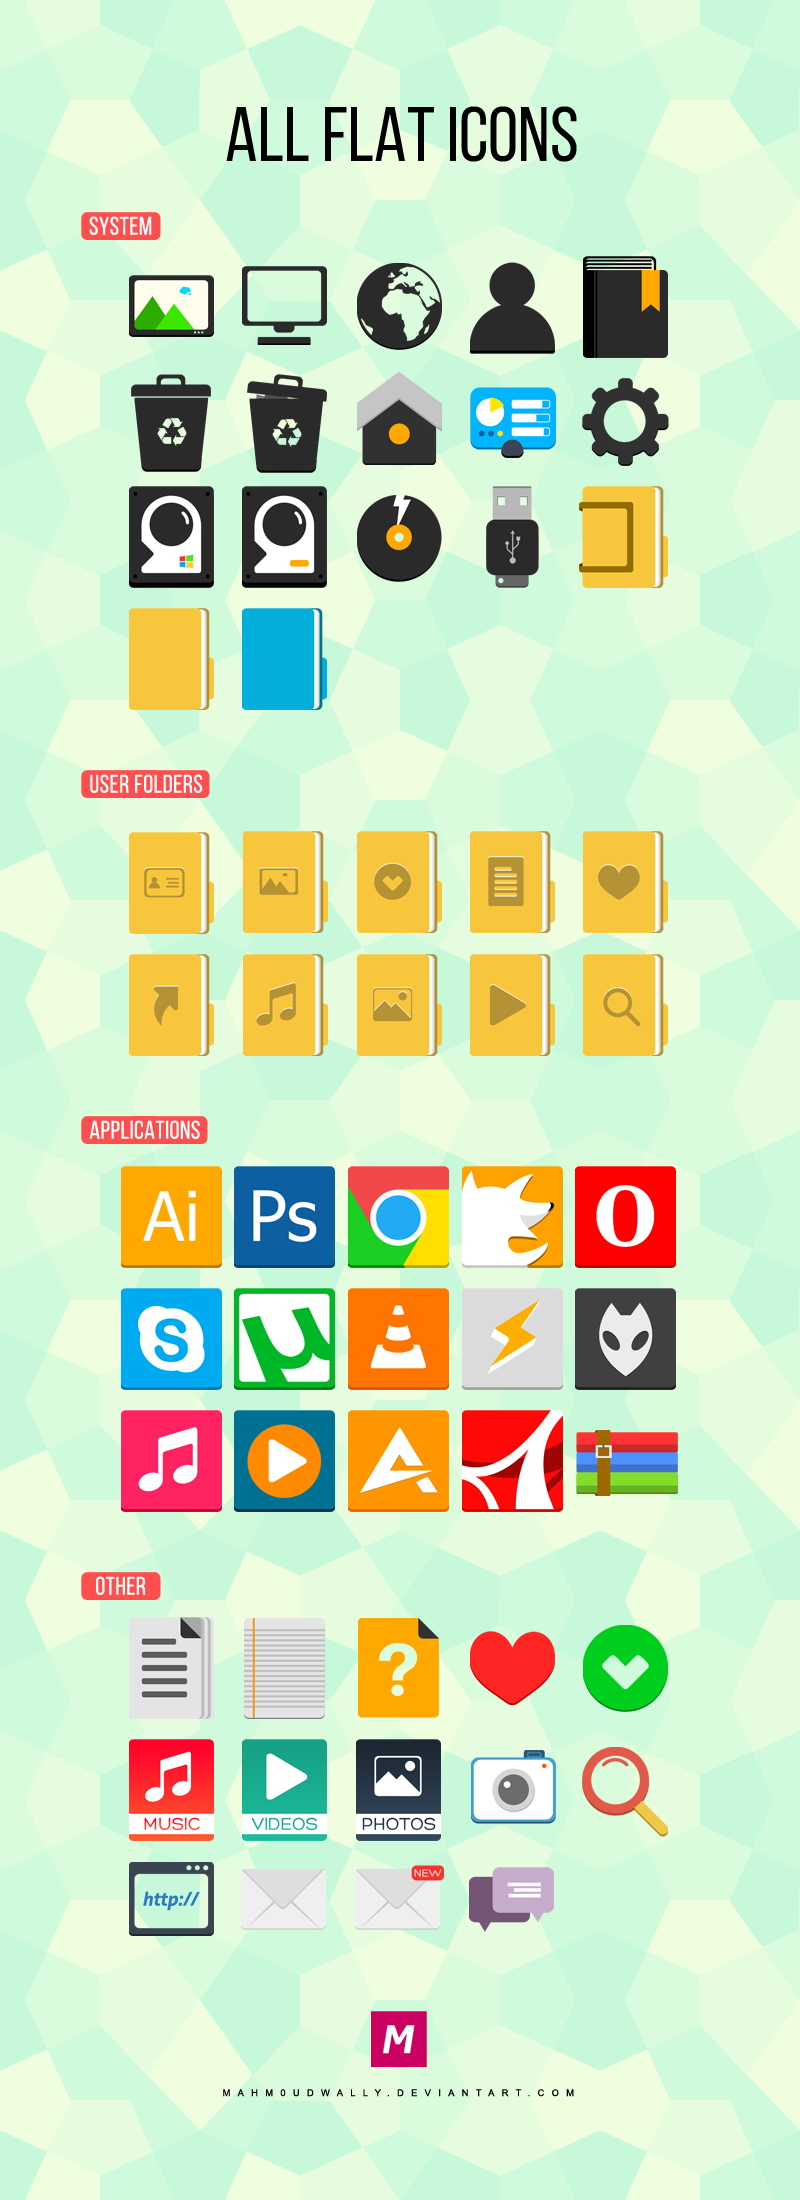 All Flat Icons (The complete set) by Mahm0udWally